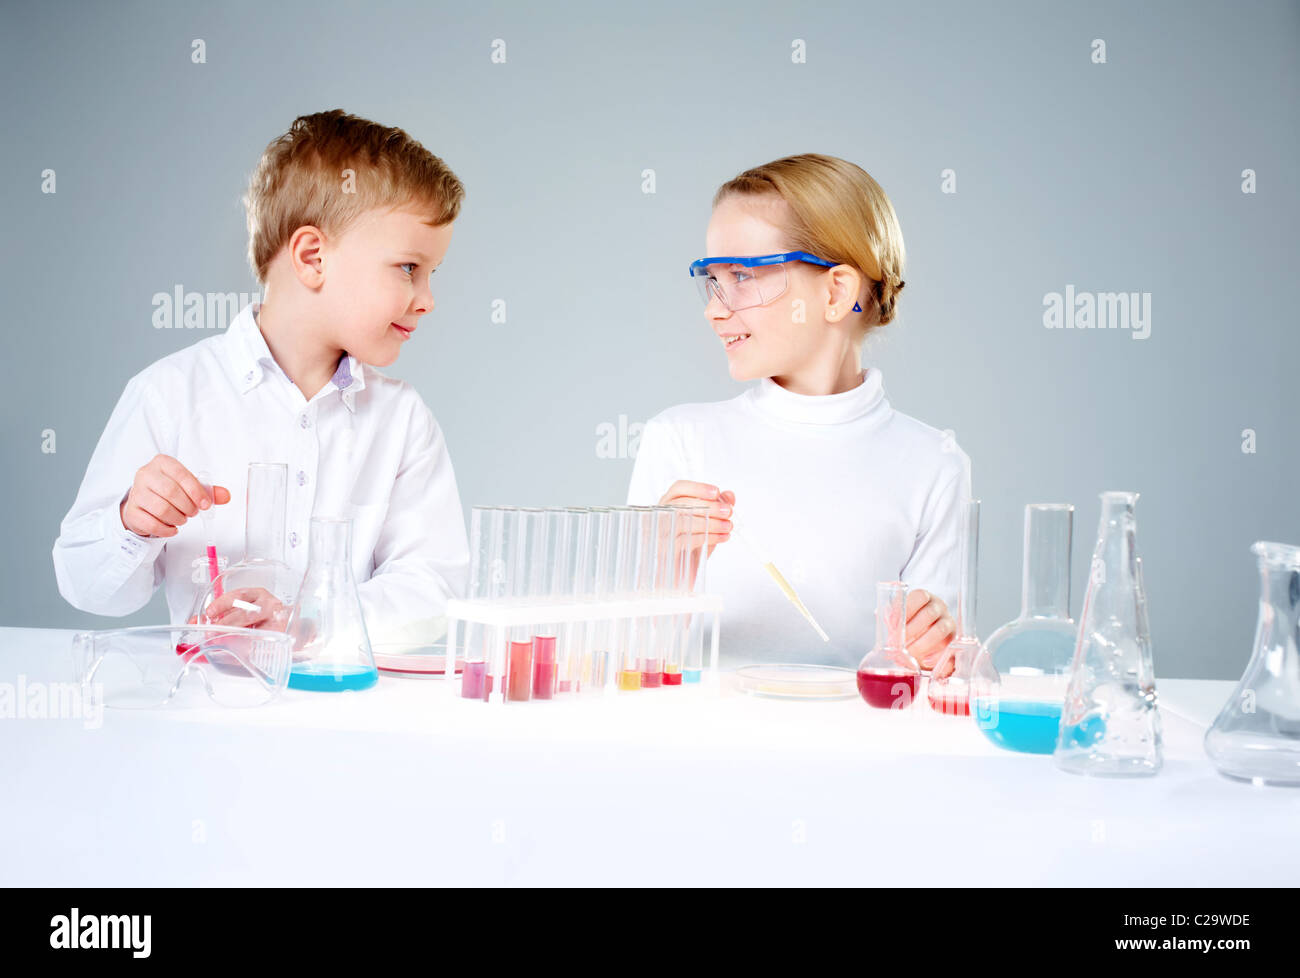 A girl and a boy making scientific experiments Stock Photo